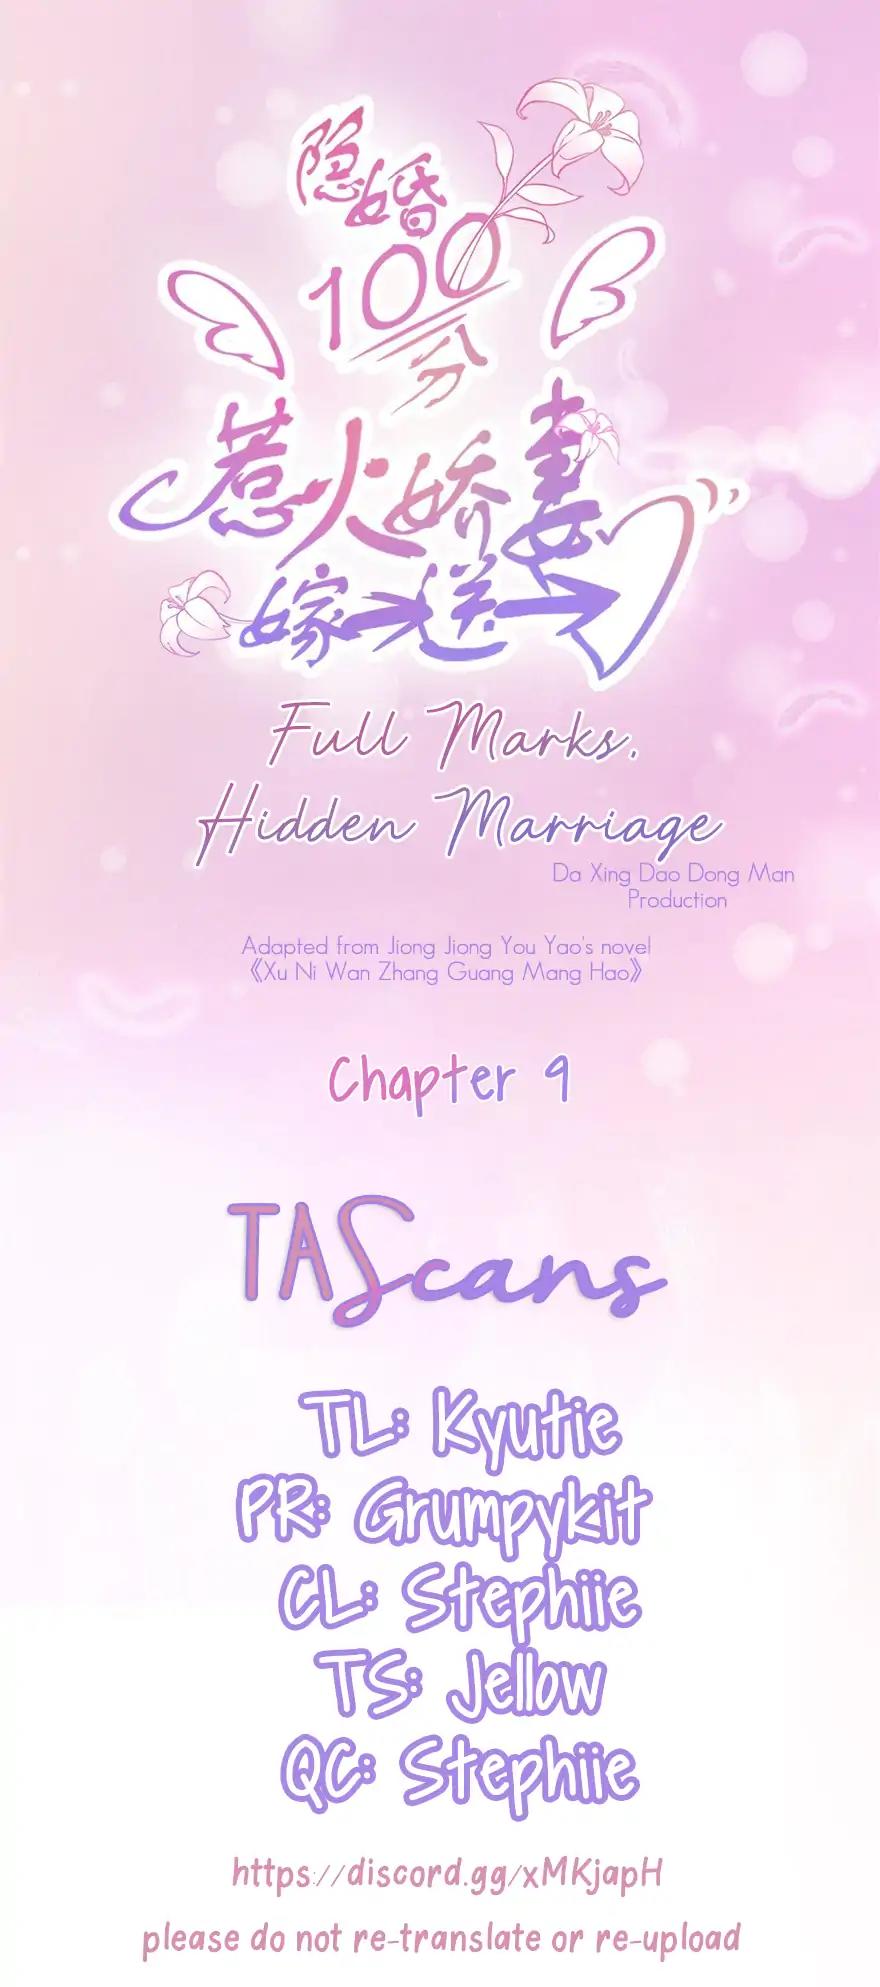 Full Marks, Hidden Marriage Chapter 9: